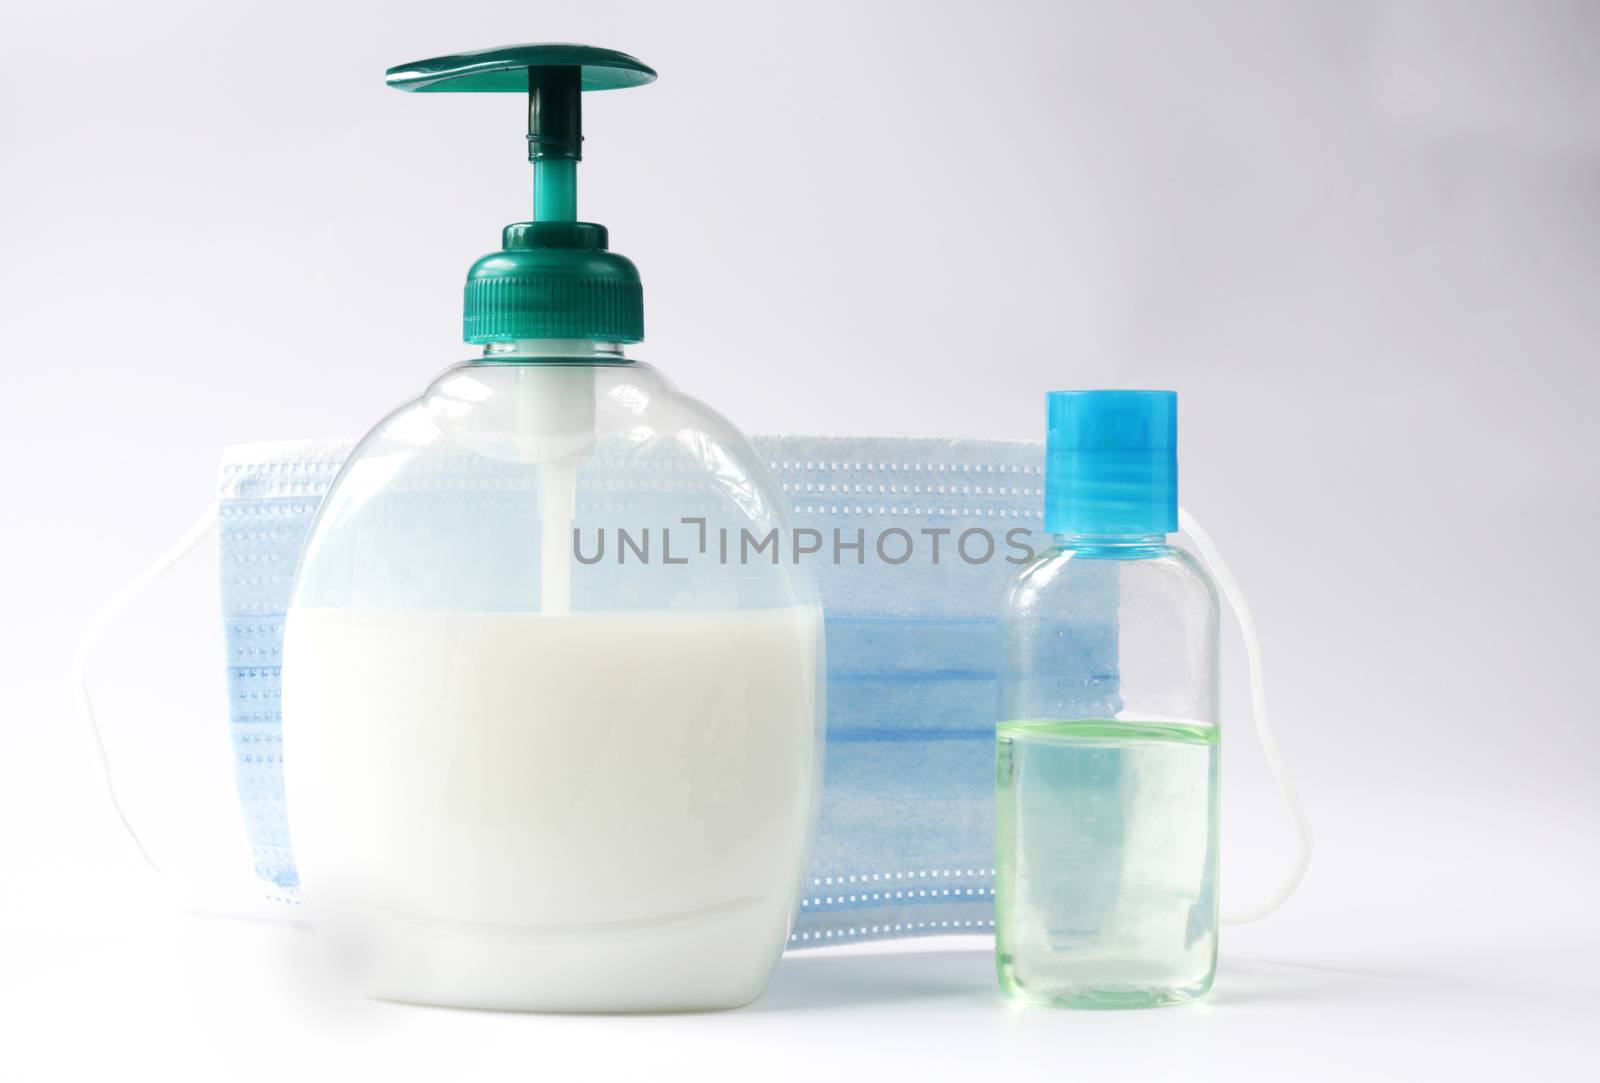 Protective face mask, soap, anticeptis, glove against virus on white background